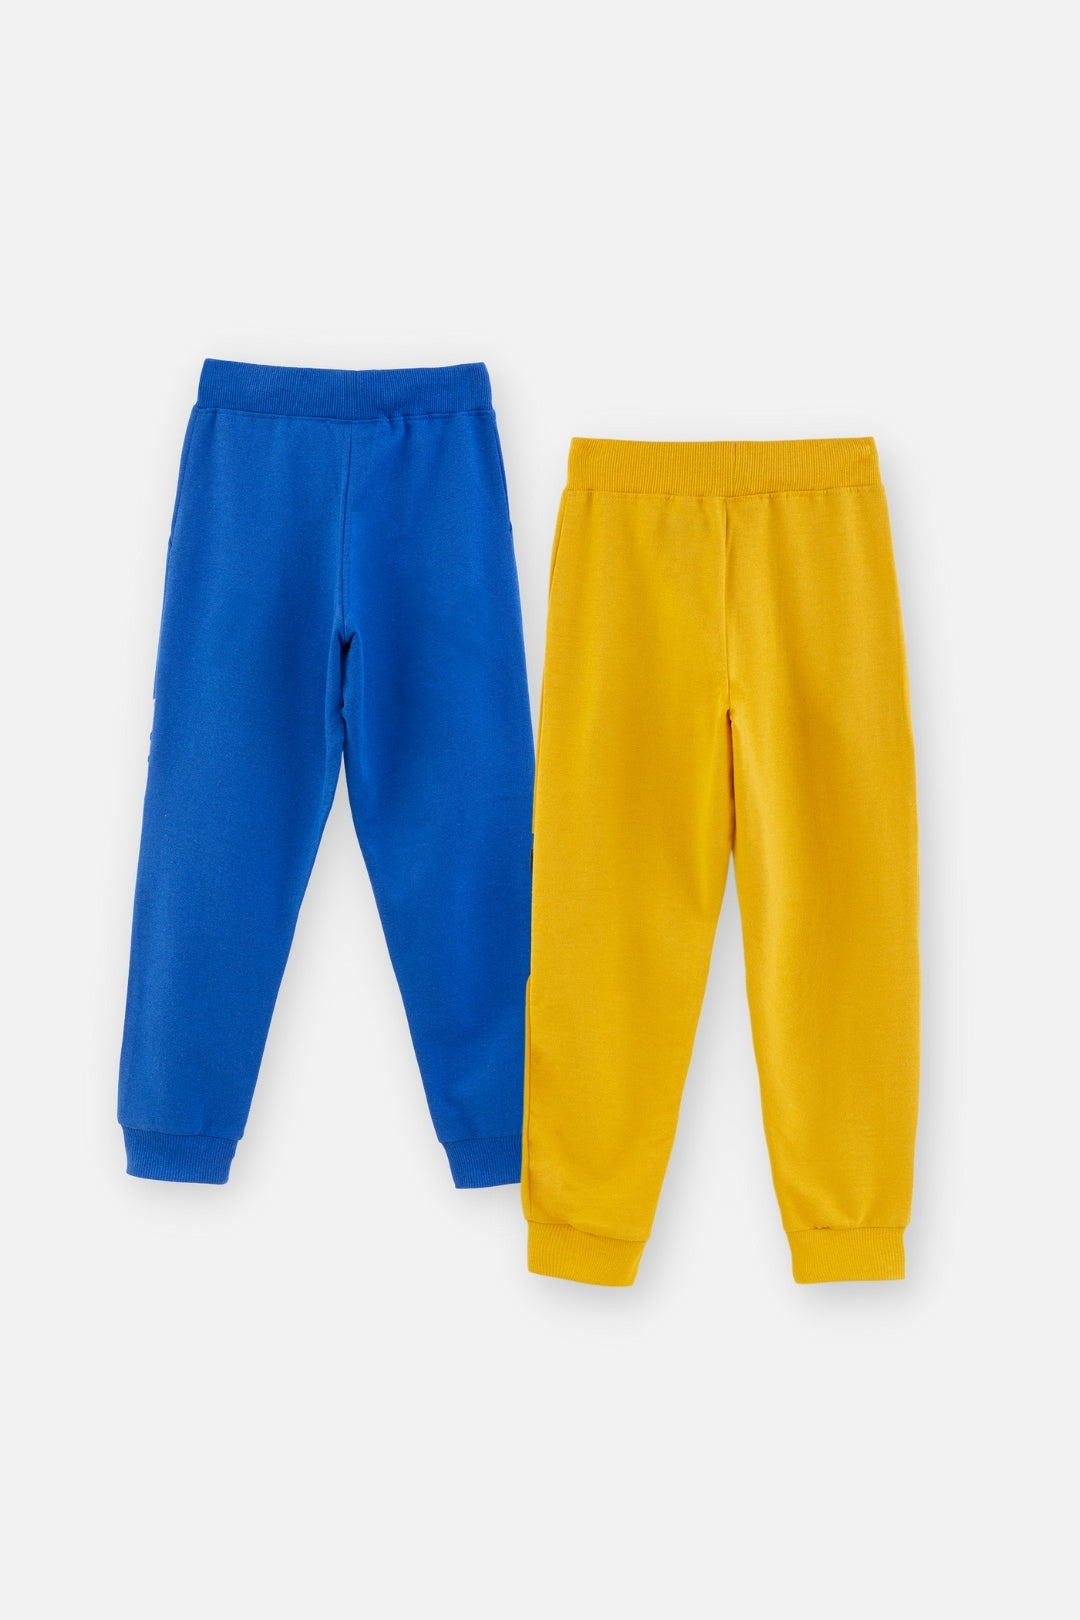 Superman Blue and Batman Joggers Pack of 2